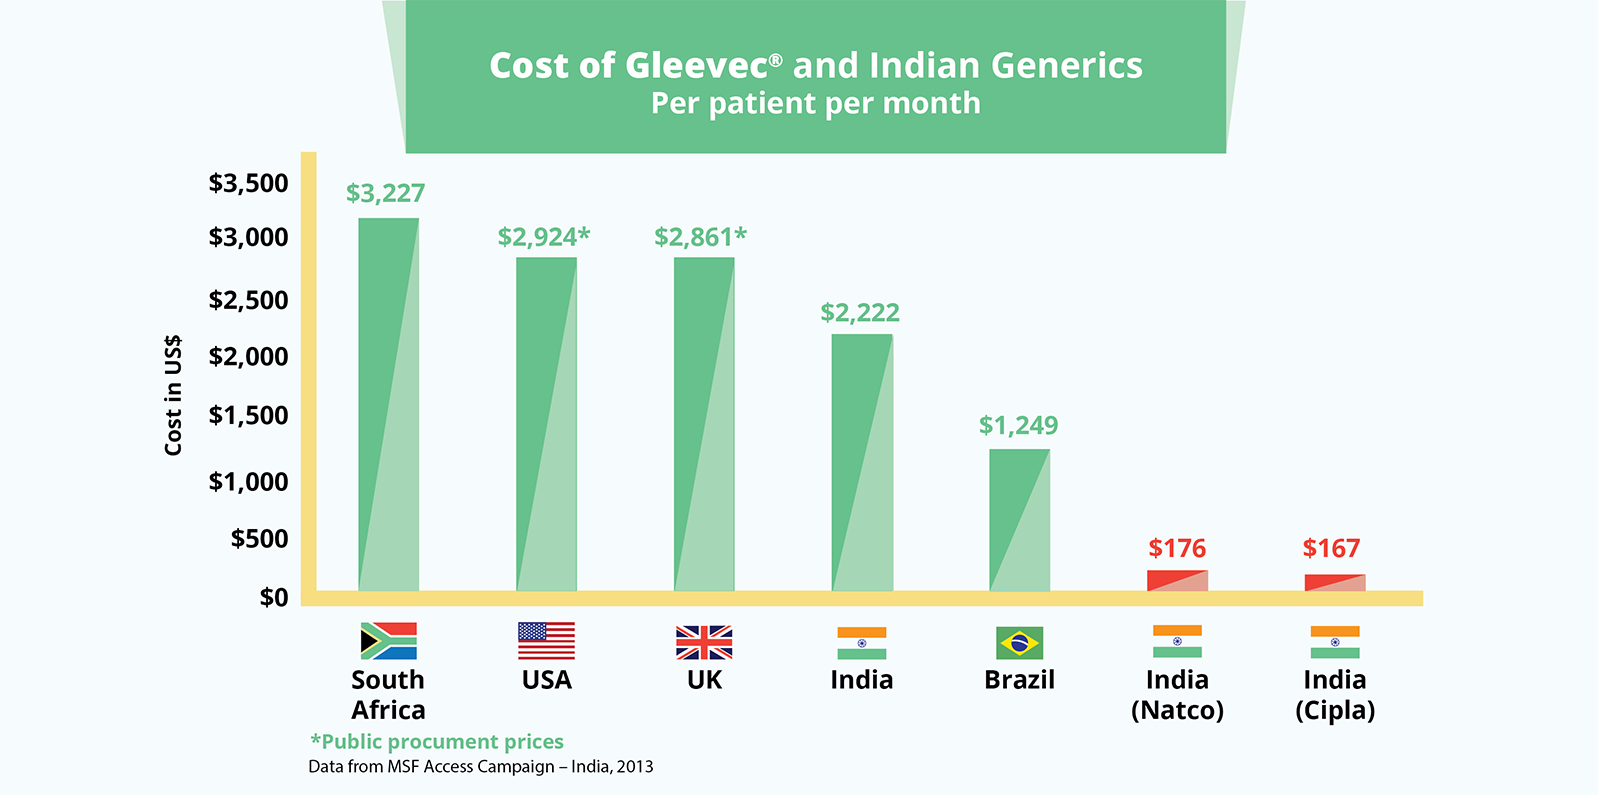 Cost of Gleevec and Indian generics.